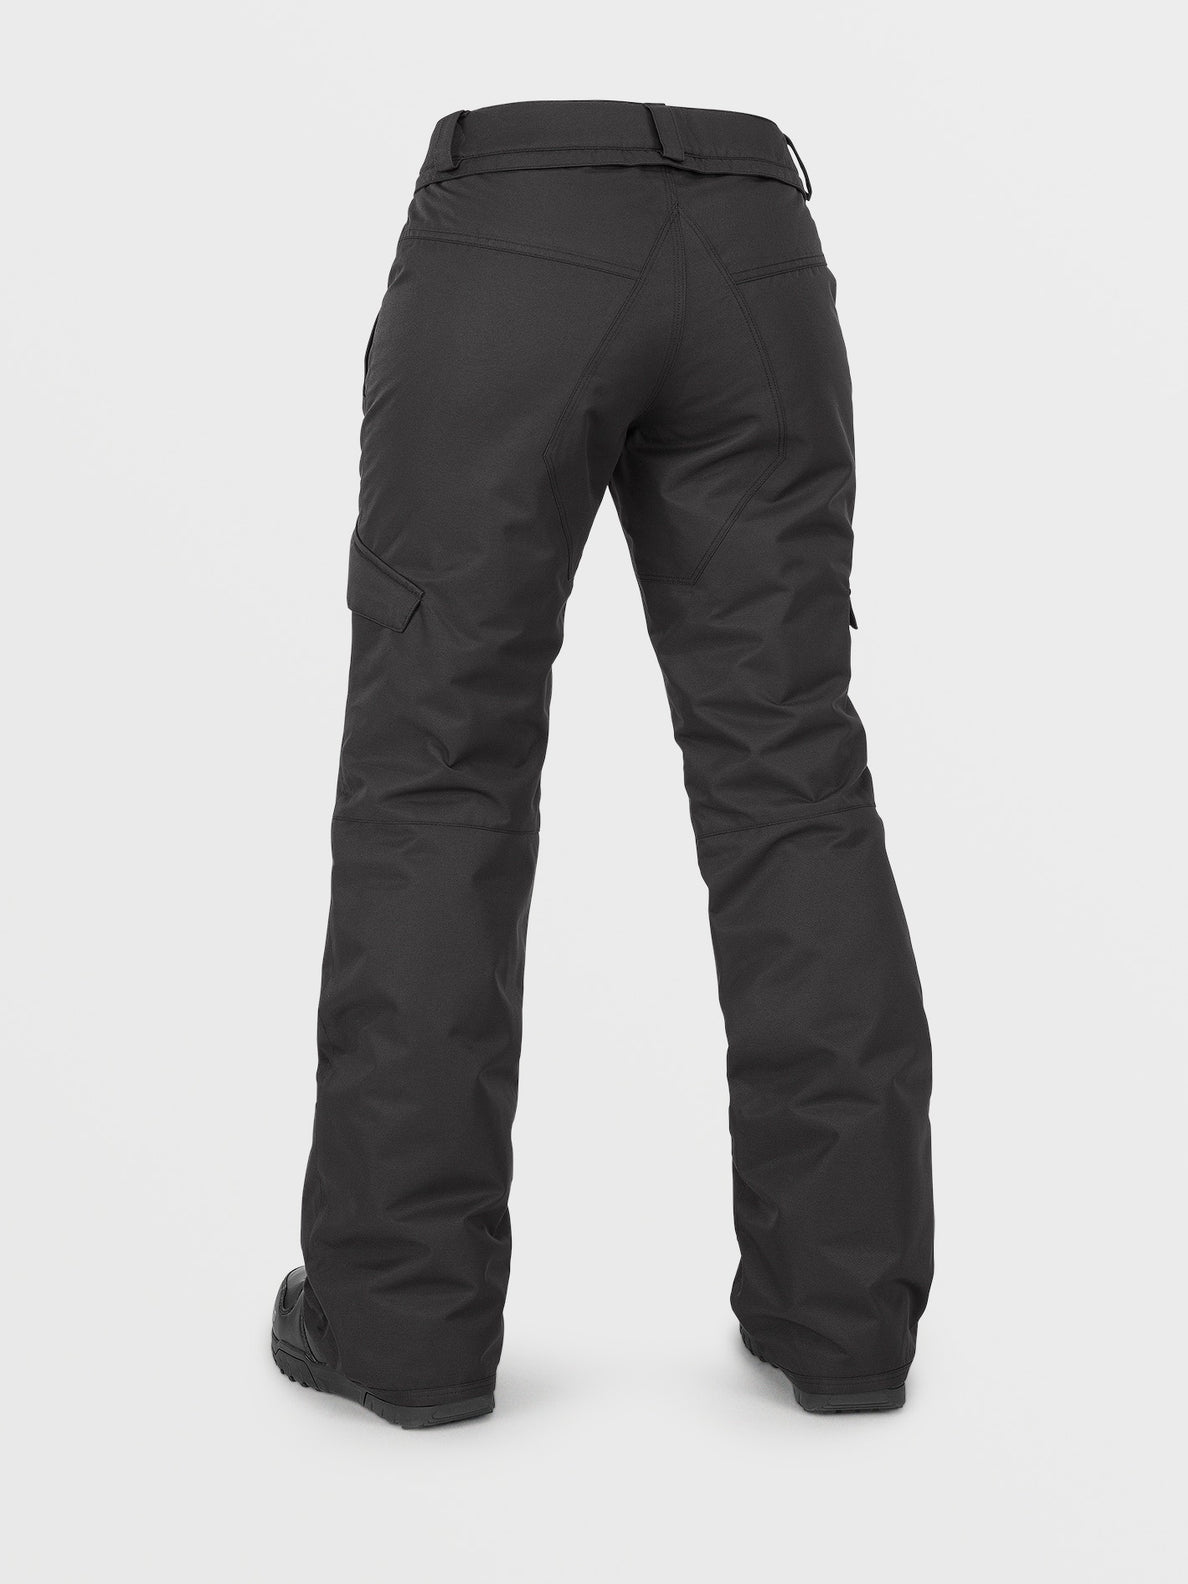 Womens Insulated Pants